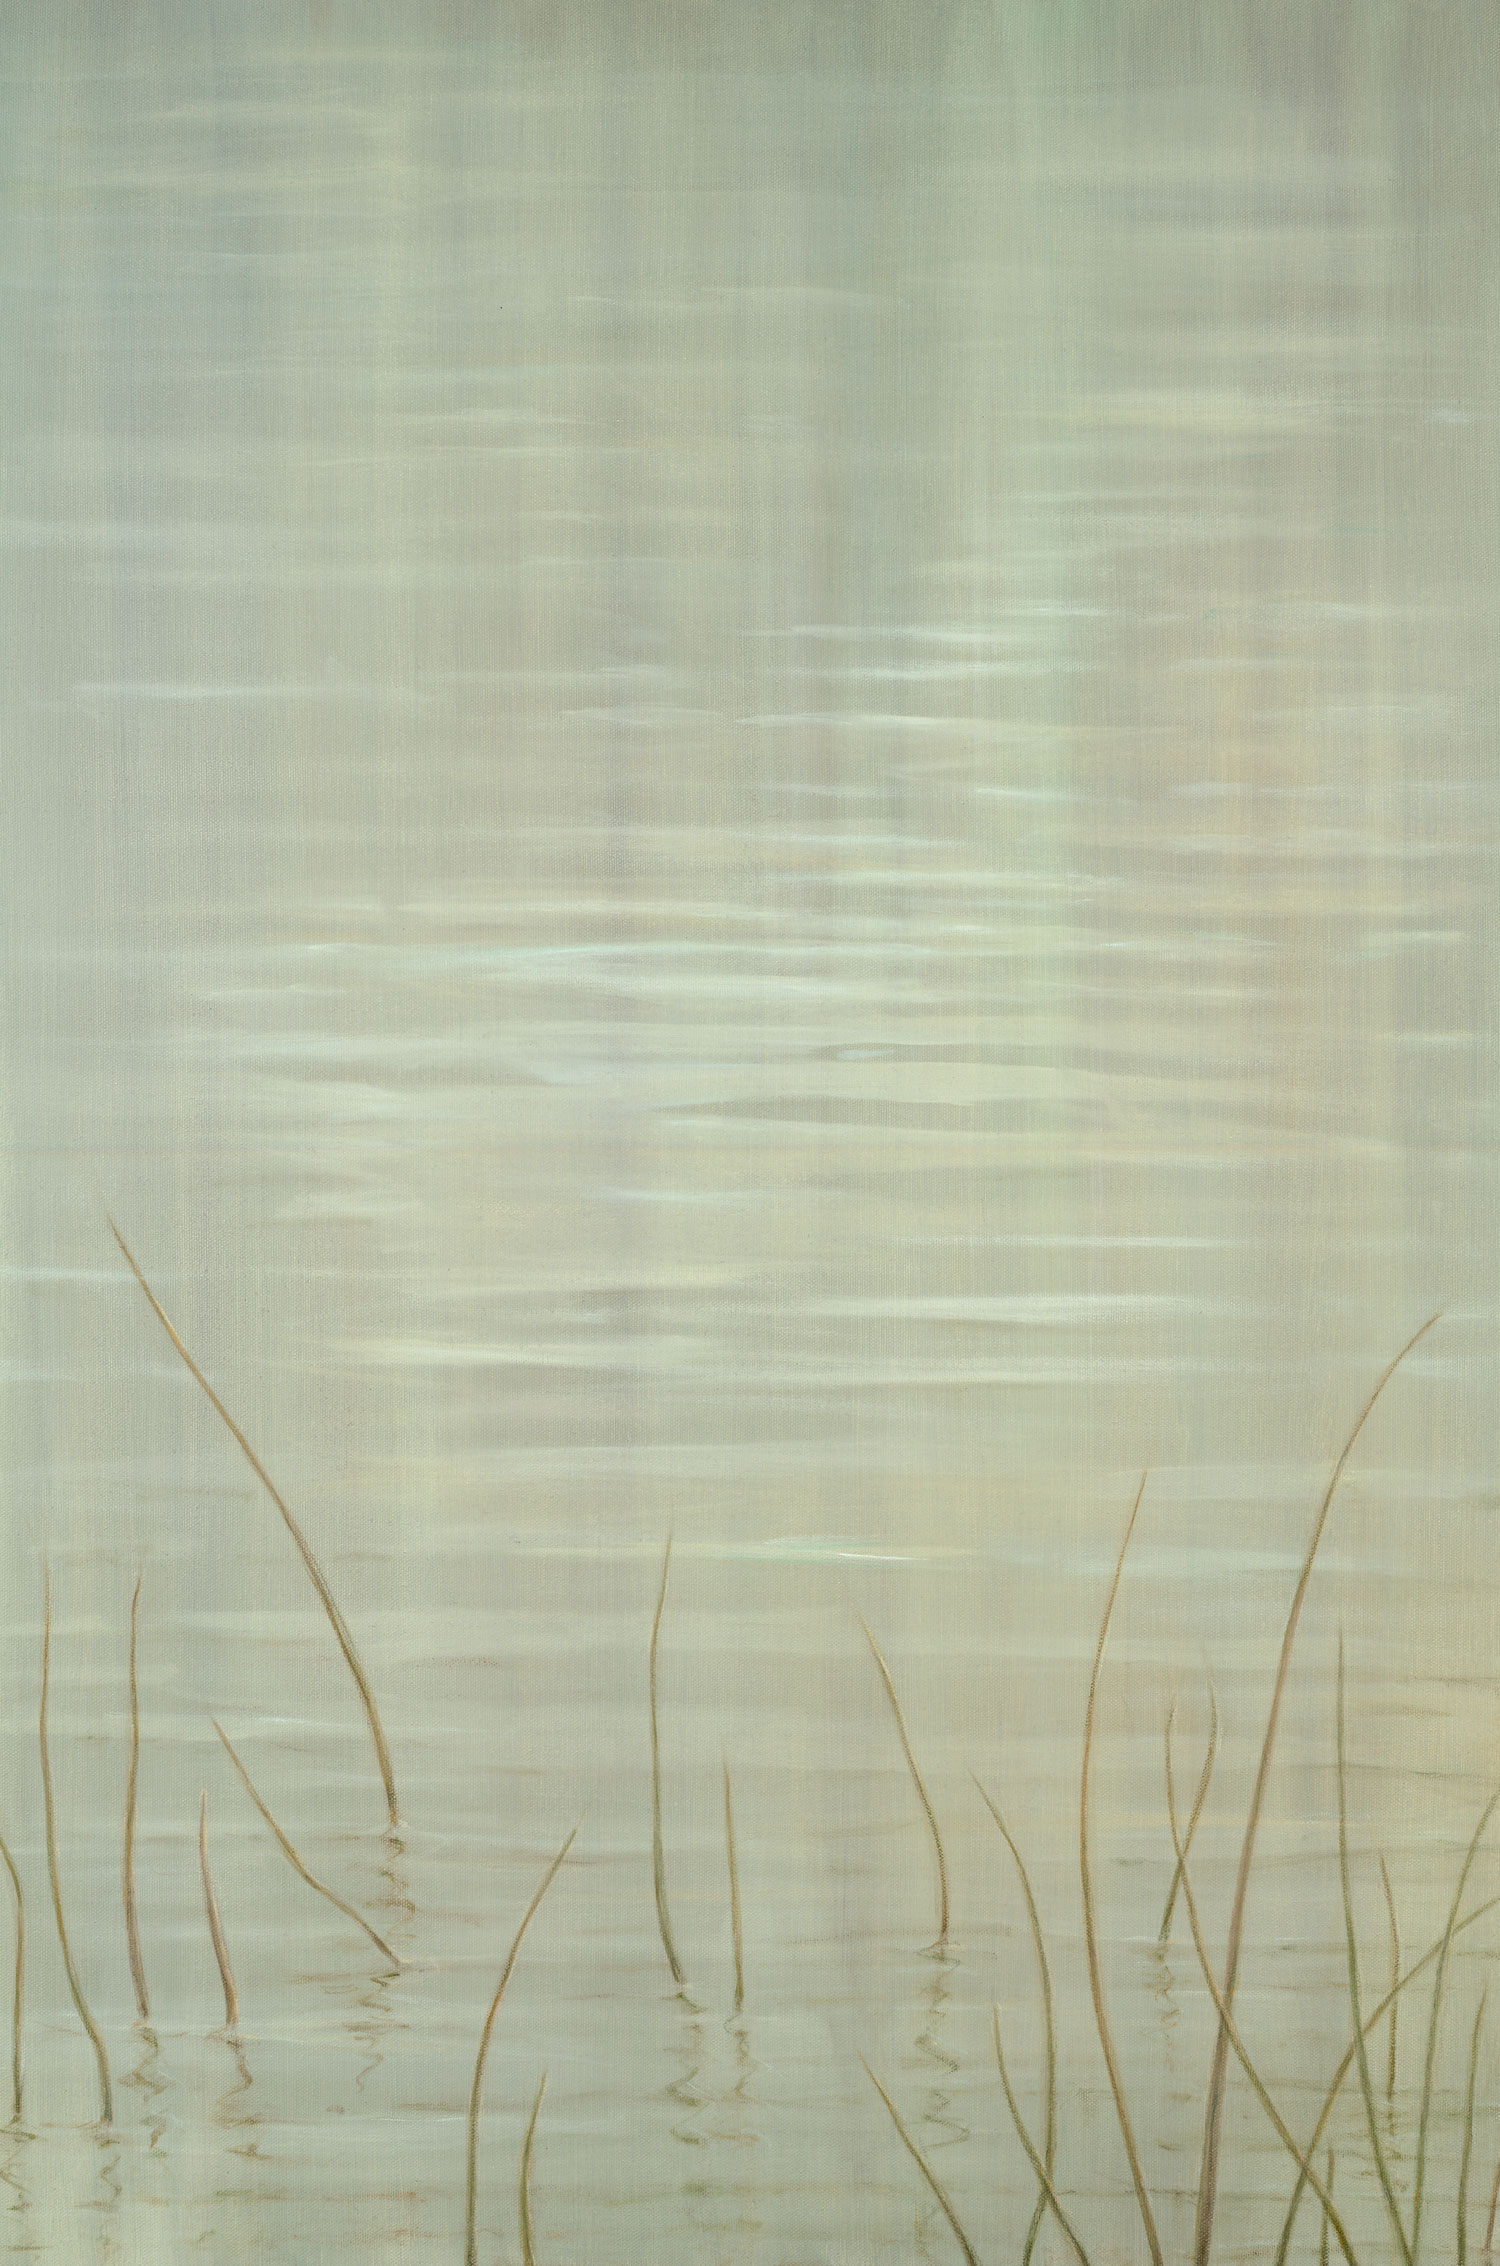 River and Reeds